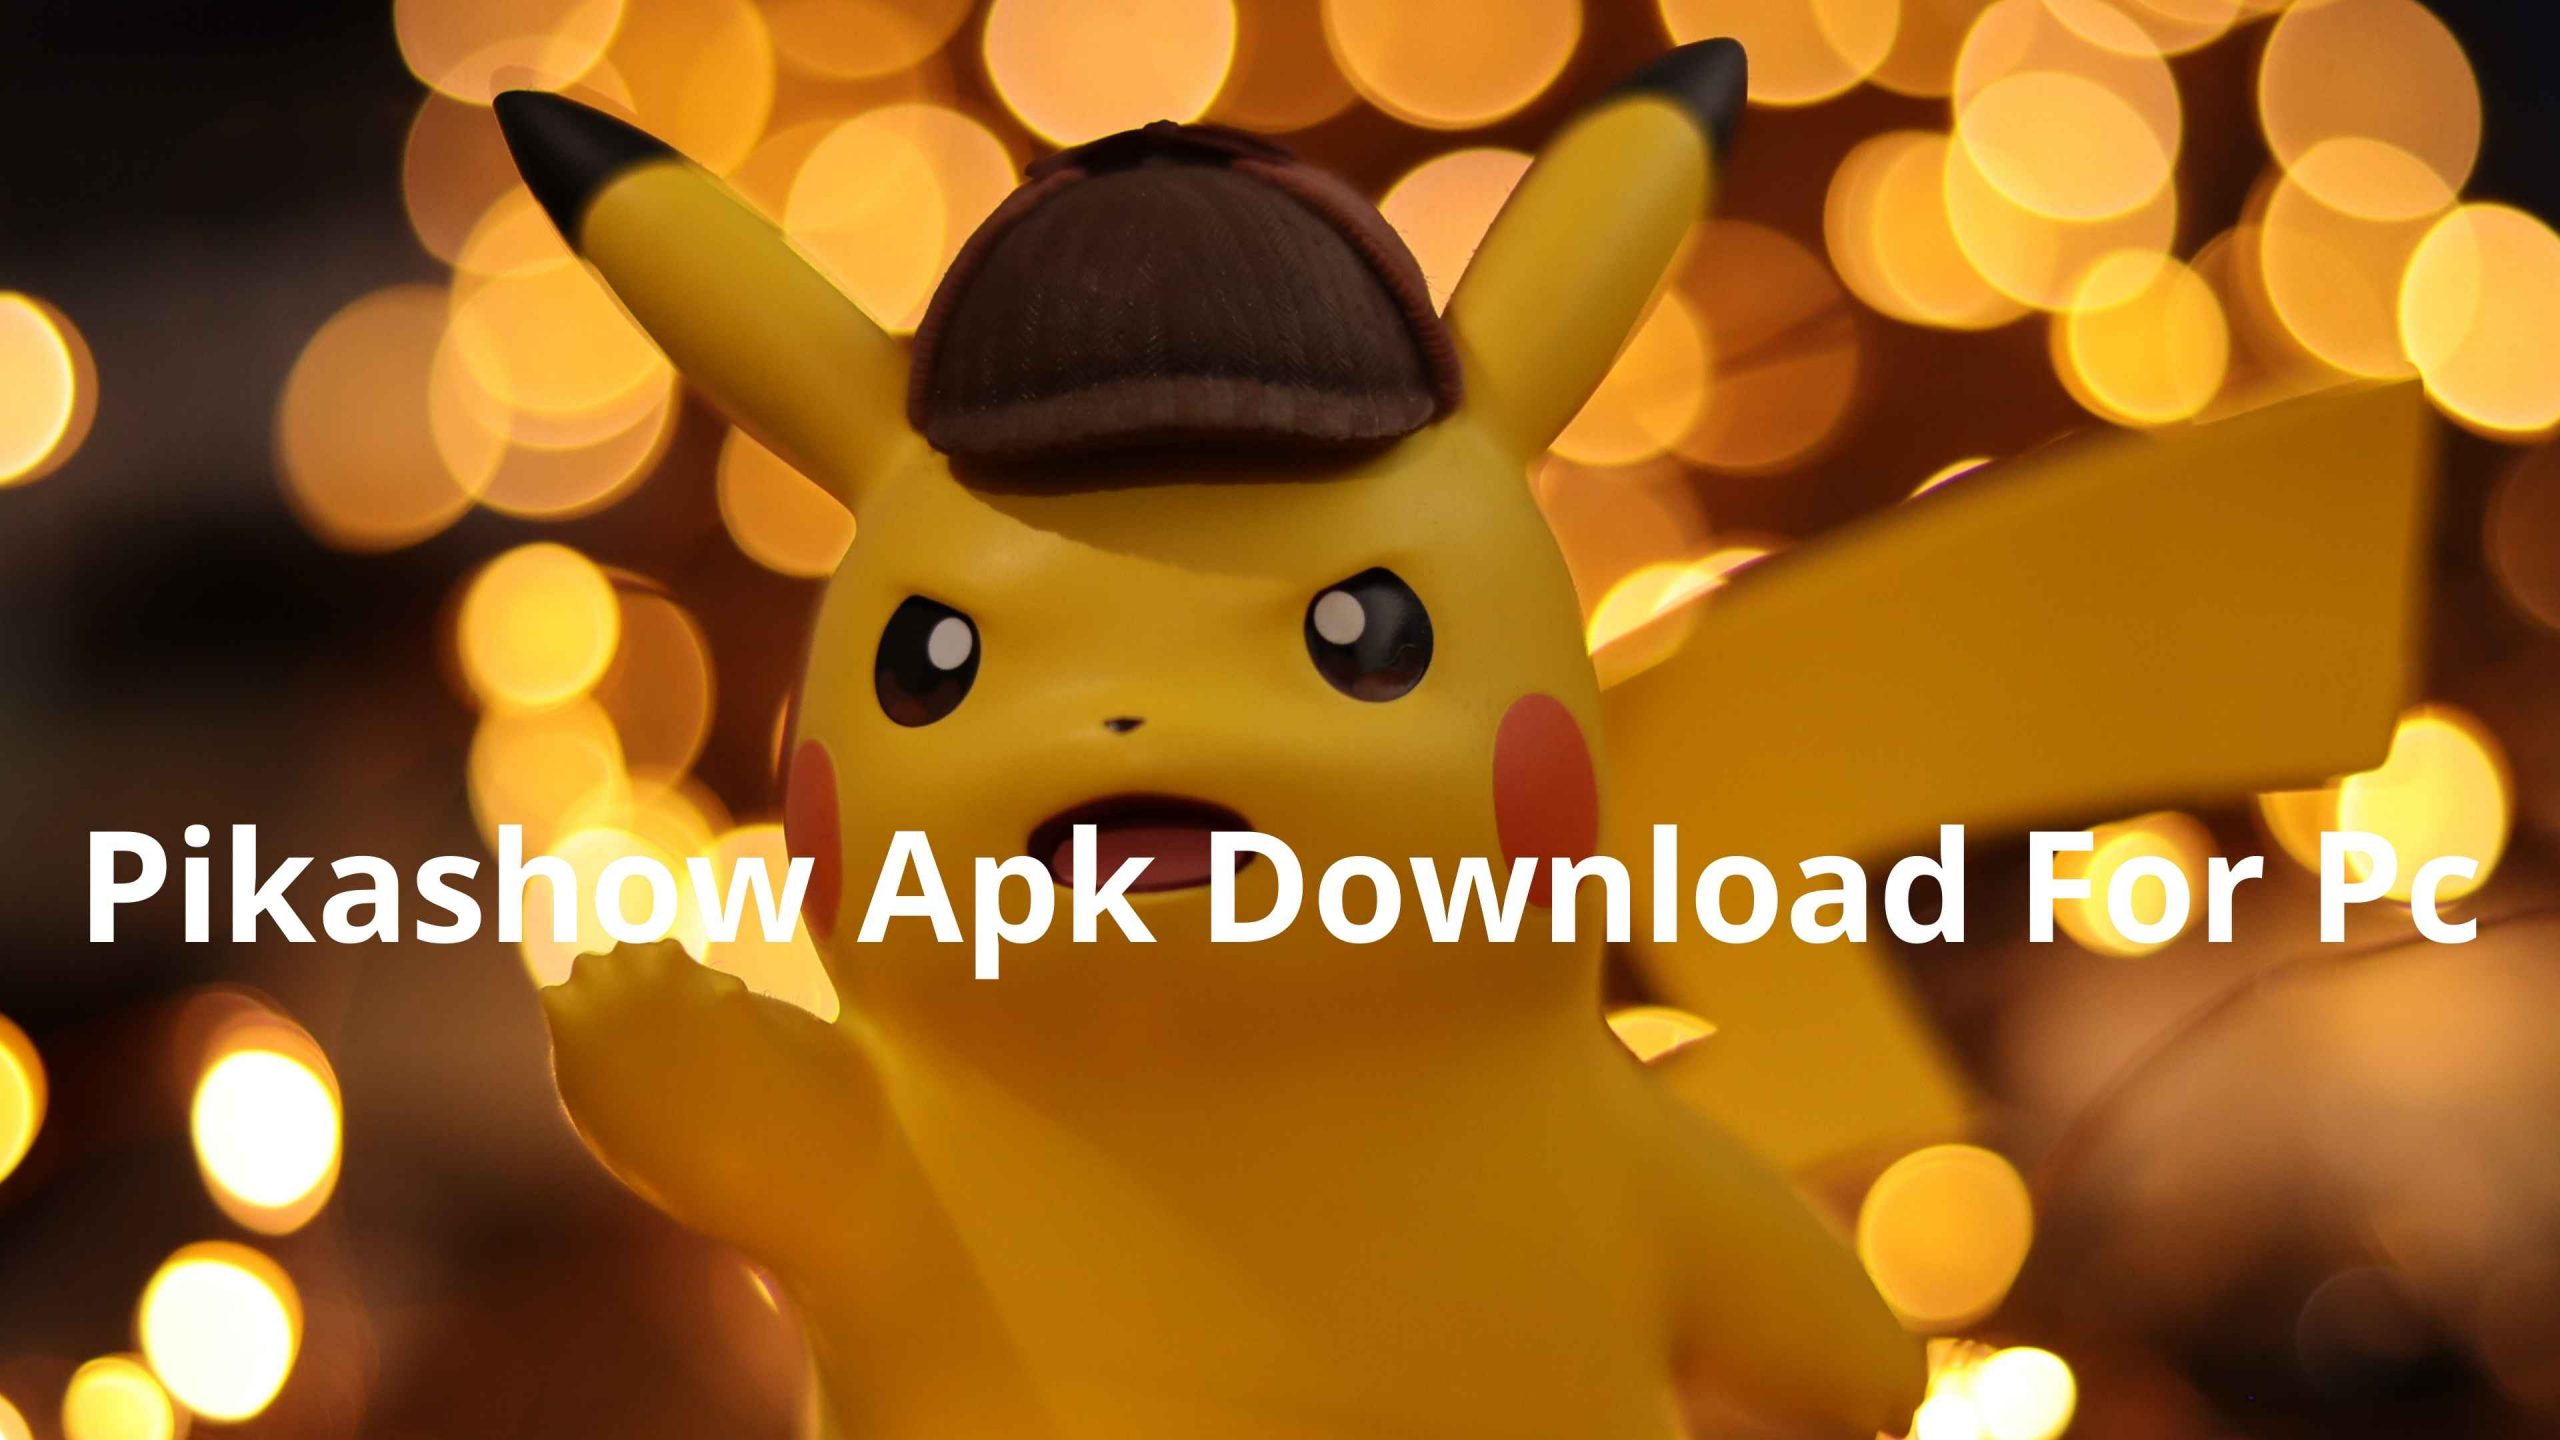 How to download Pikashow app for pc, apk latest free version.